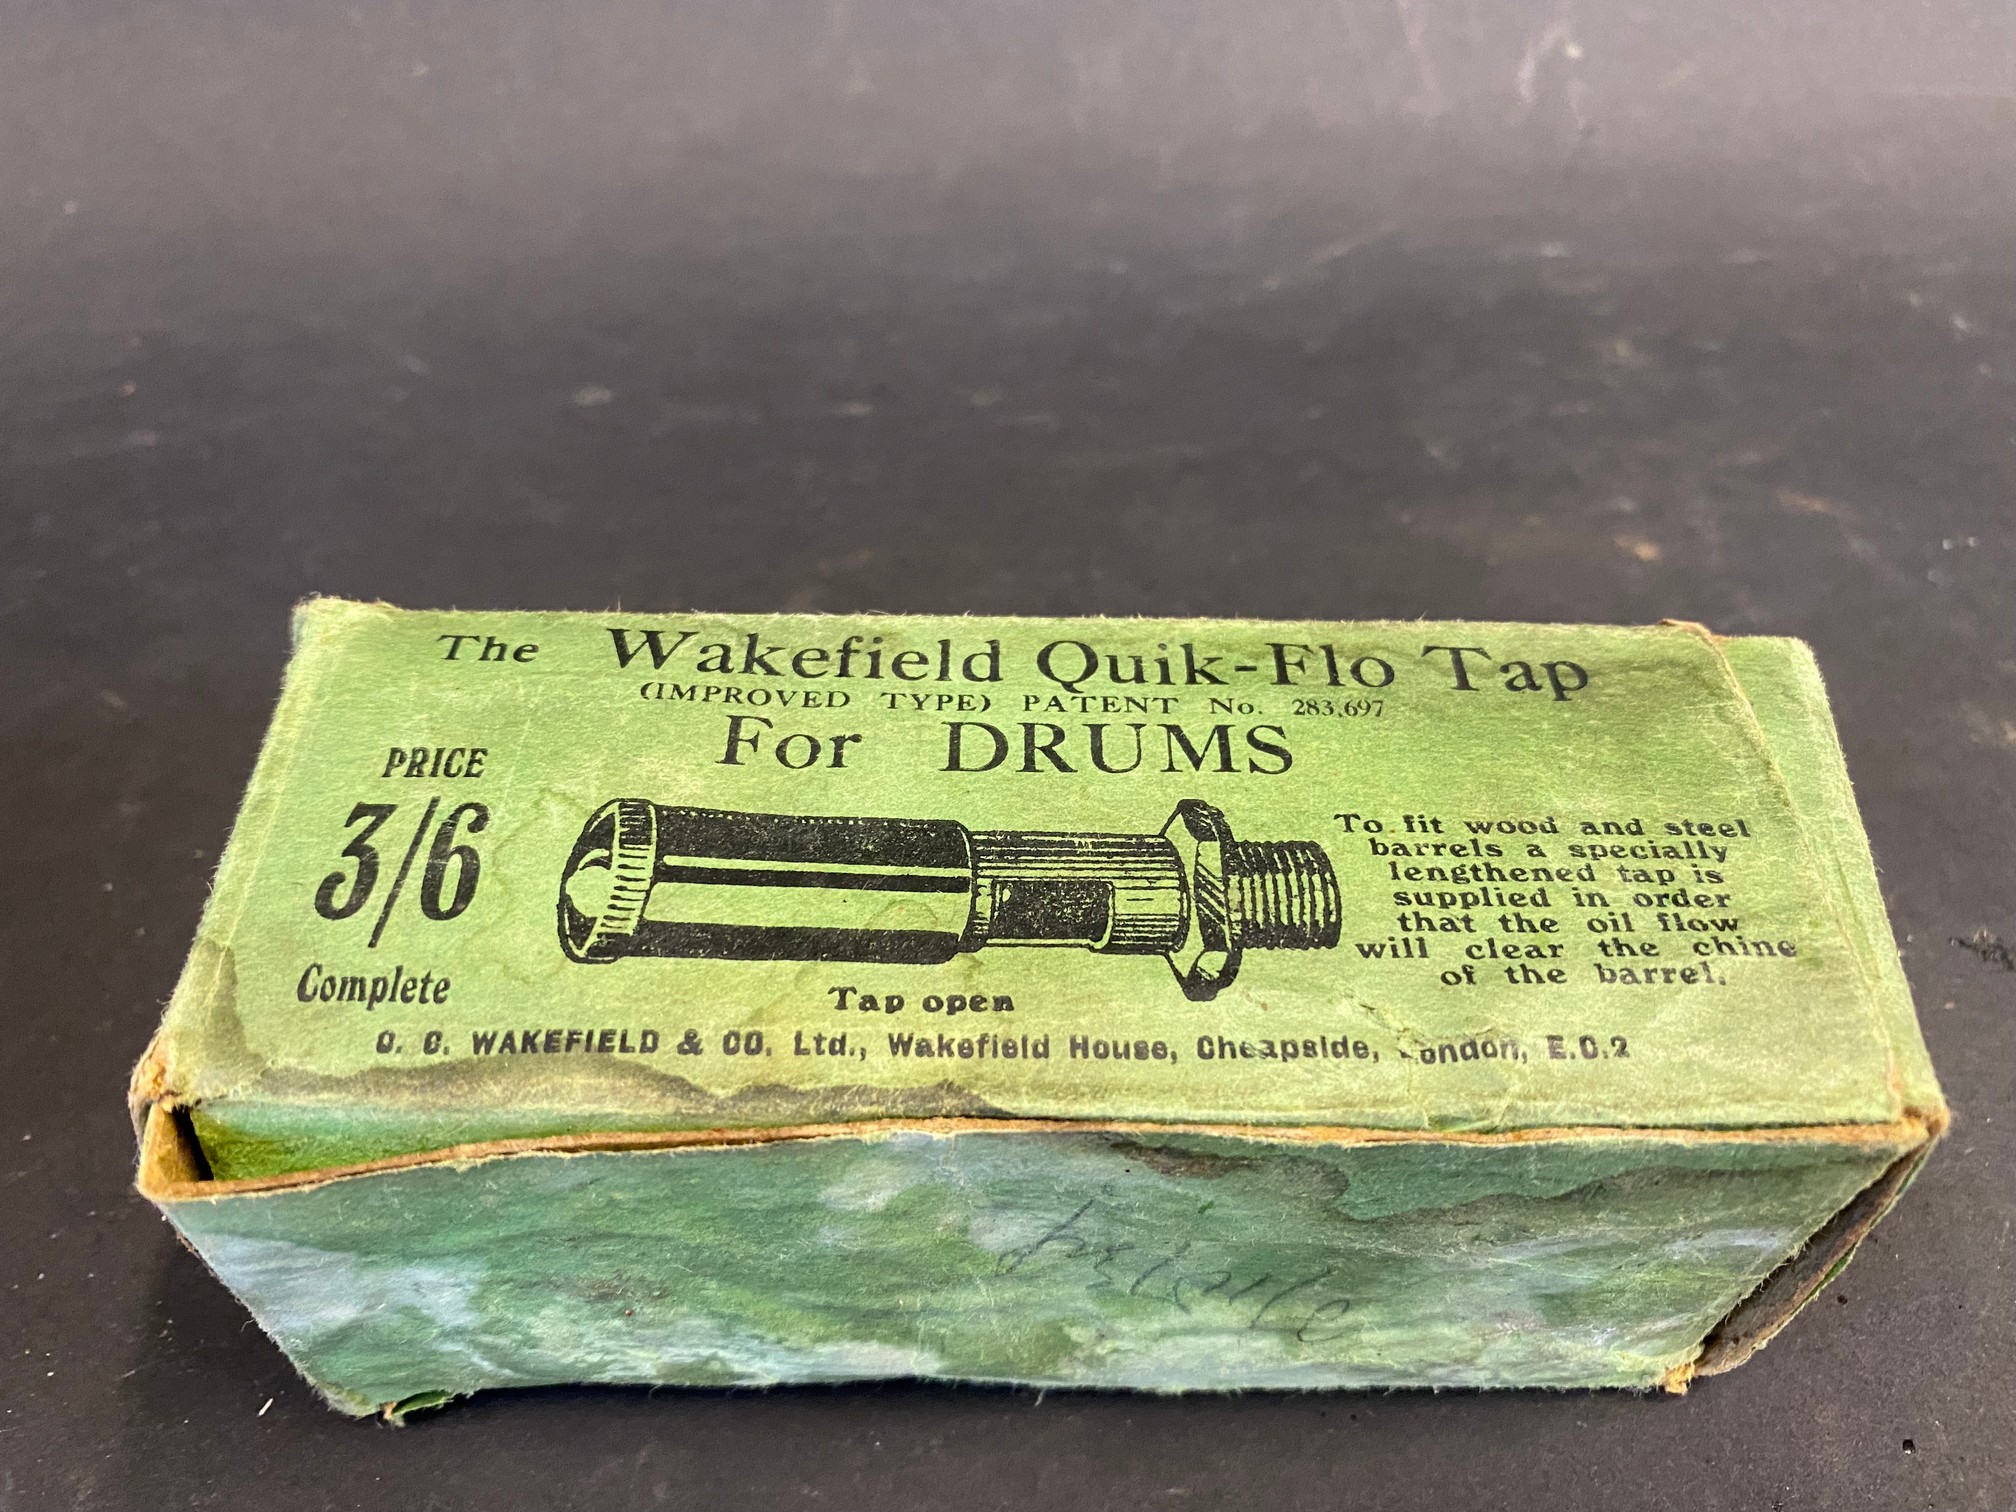 An early boxed Wakefield Quik-Flo tap for drums.